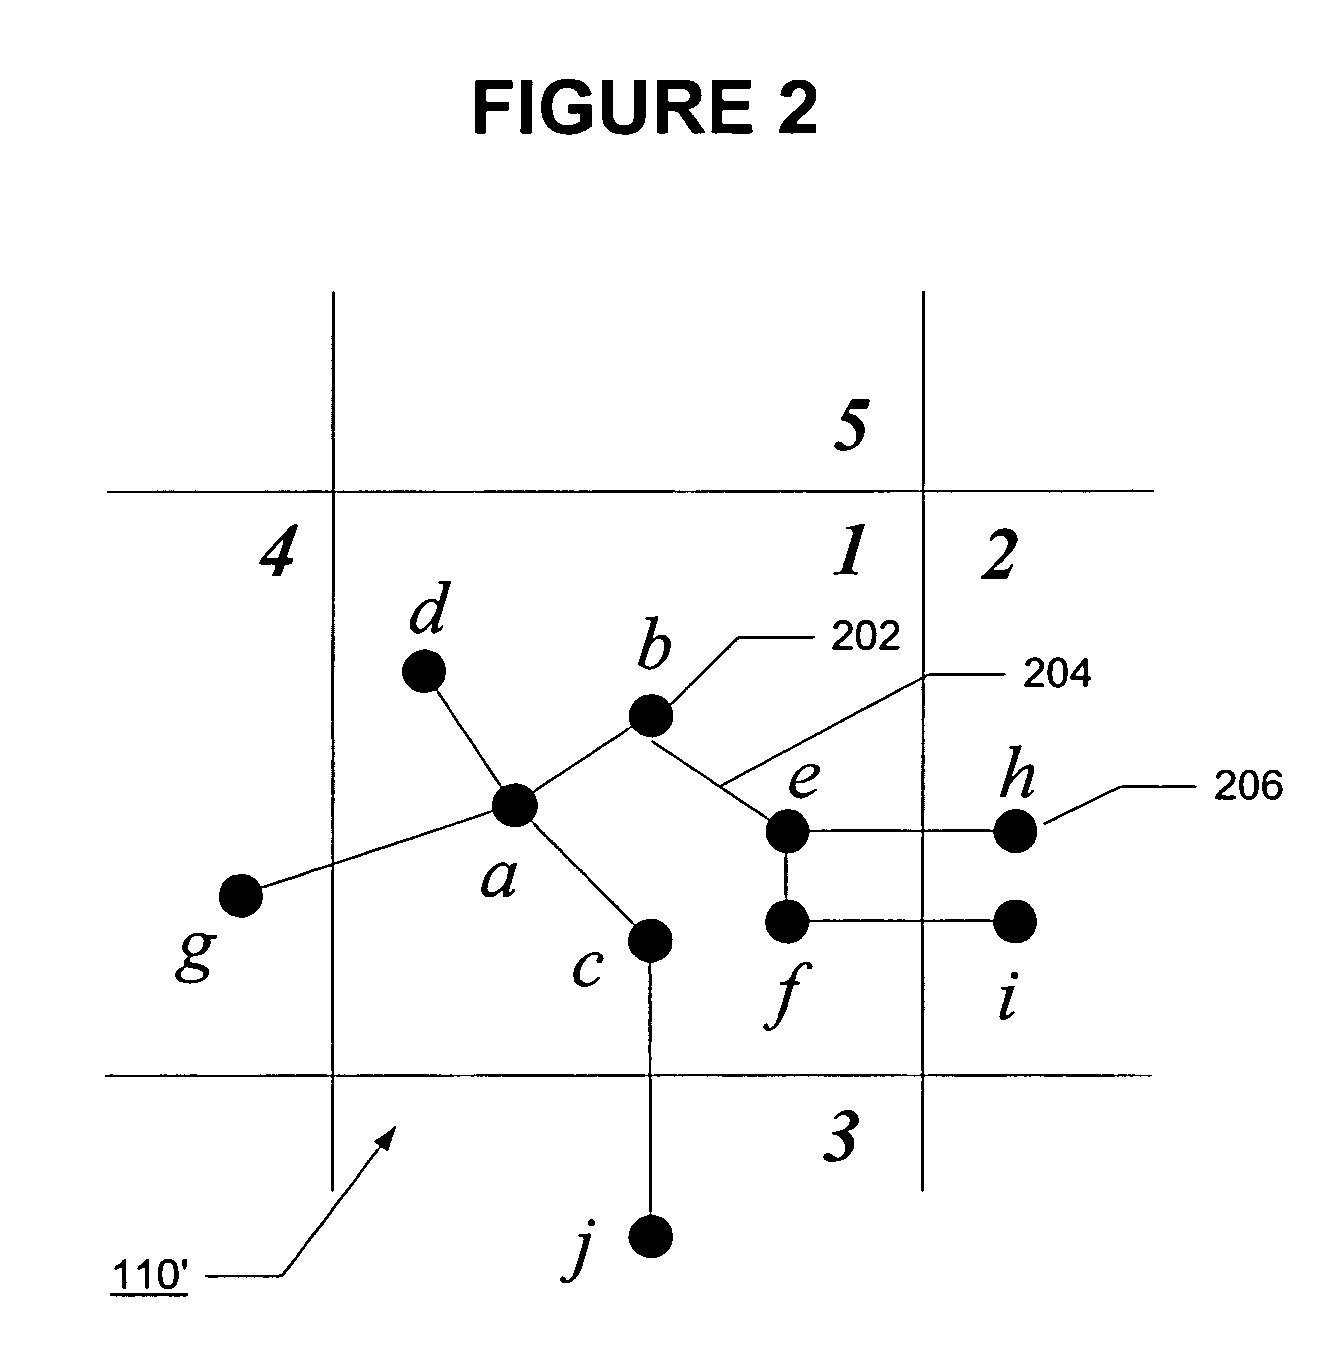 Methods and apparatus for routing in a mobile ad hoc network